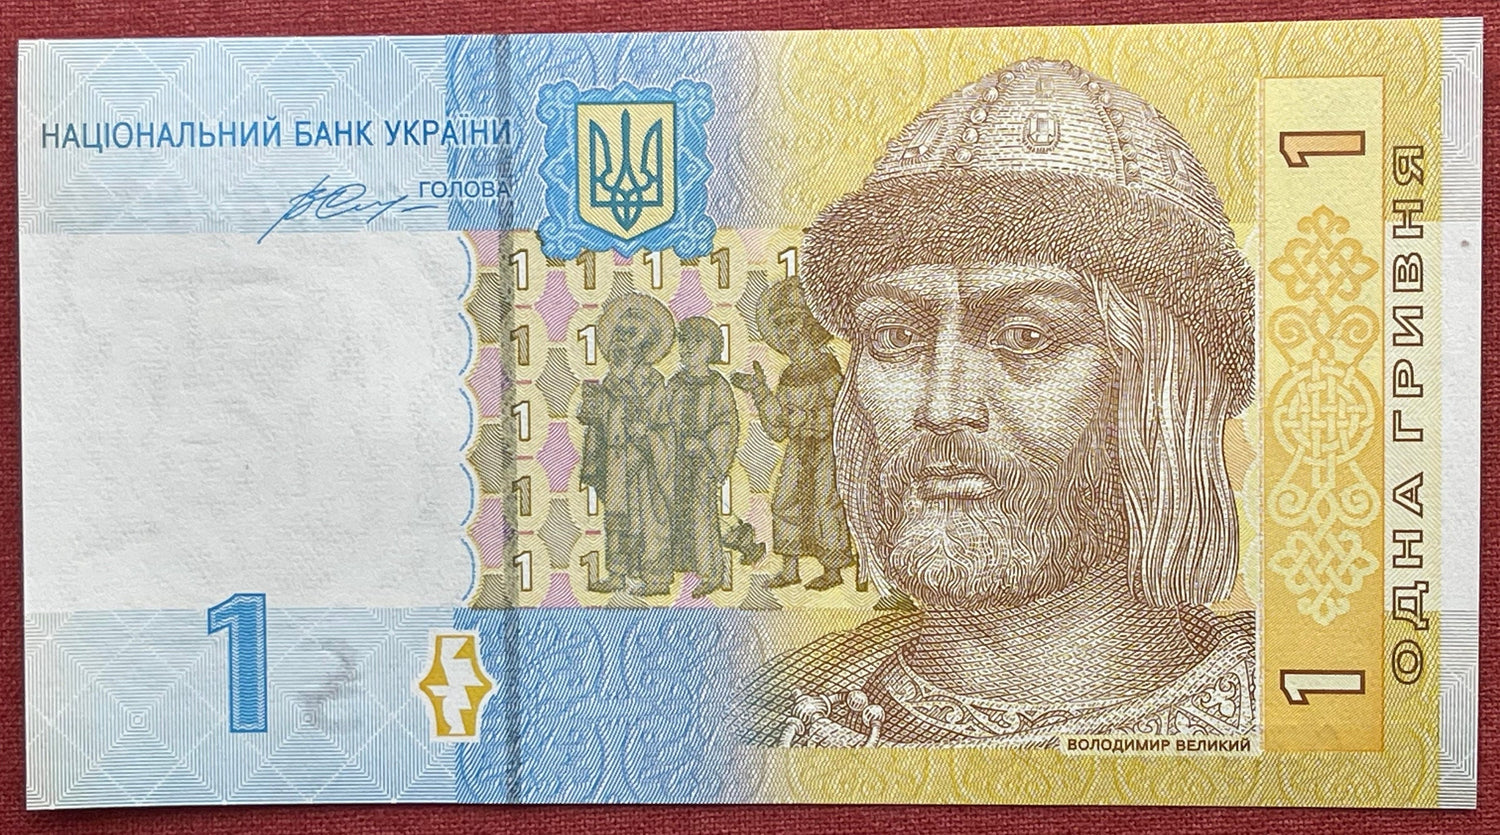 Saint Vladimir the Great and St Theodore & Church of the Tithes 1 Hryvnia Ukraine Authentic Banknote Money for Collage (Falcon)